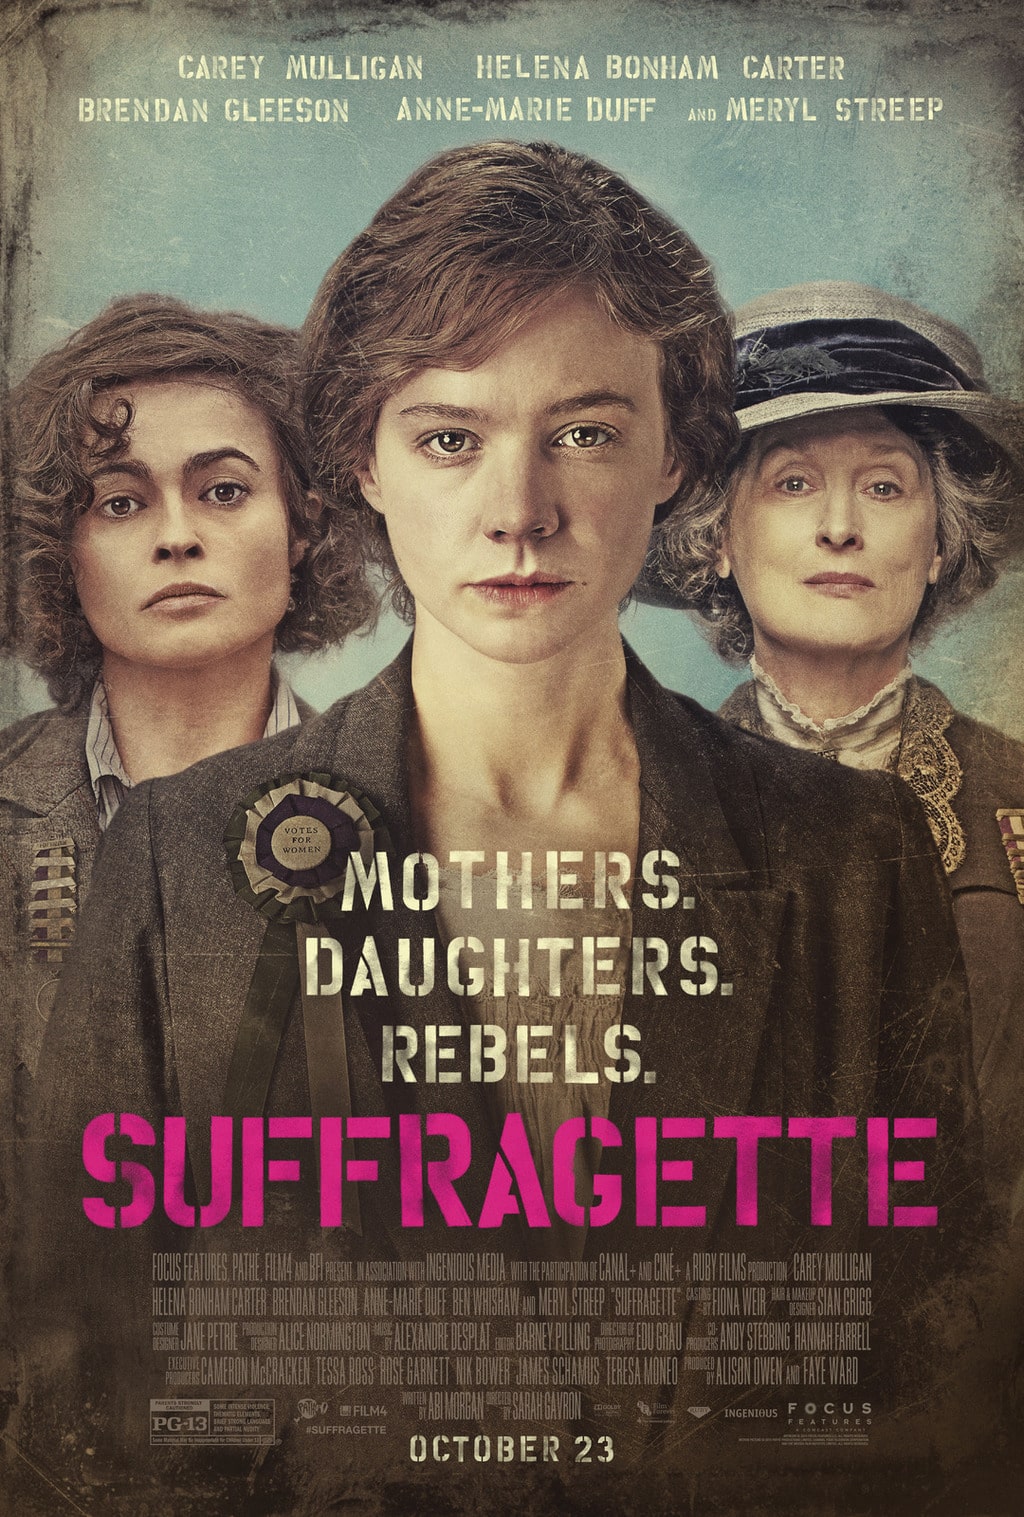 Happy Women’s Equality Day and Suffragette Film Trailer #SUFFRAGETTE